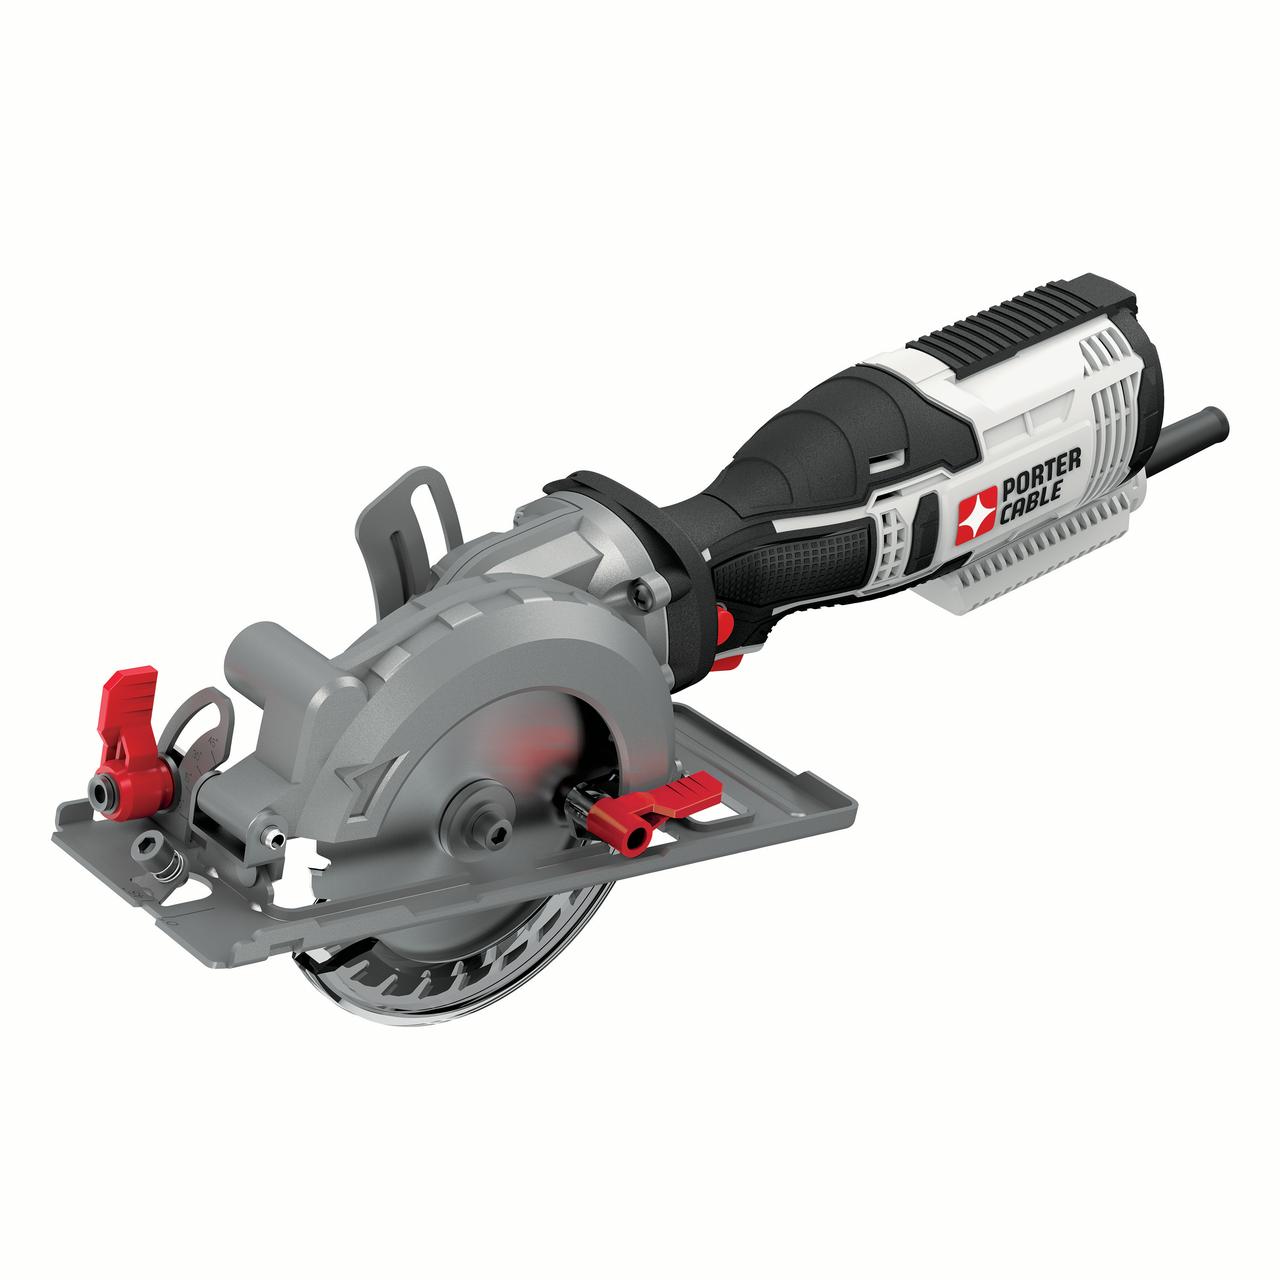 PORTER CABLE 5.5-Amp 4.5-Inch Compact Circular Saw Kit, PCE381K - image 2 of 3